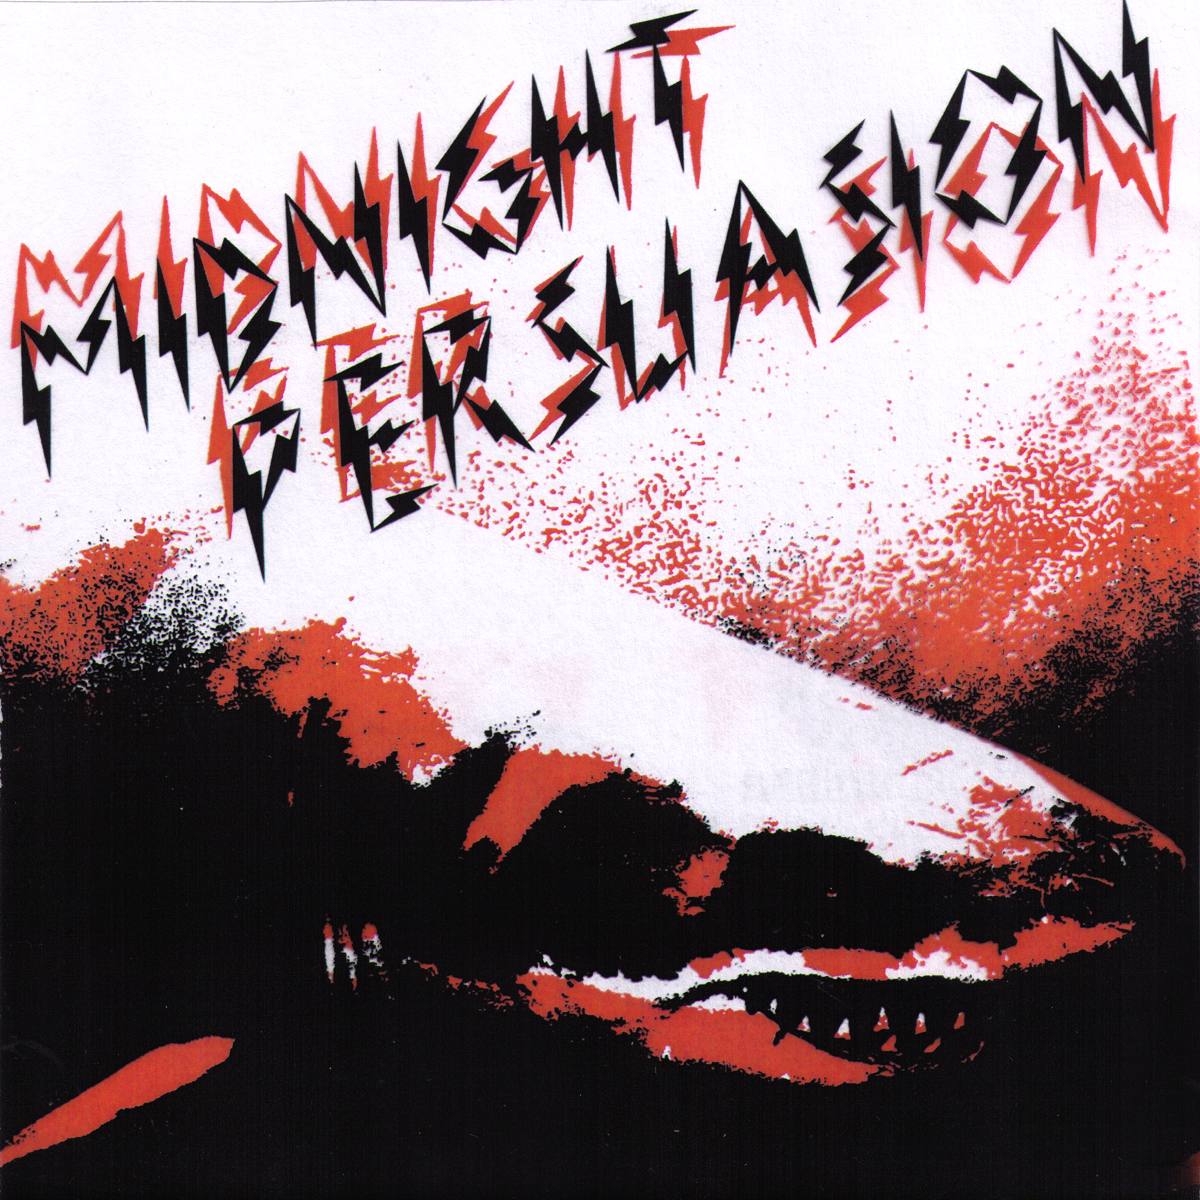 Midnight Persuasion- S/T 7” ~RAREST CLEAR ACETATE COVER LTD TO 30!